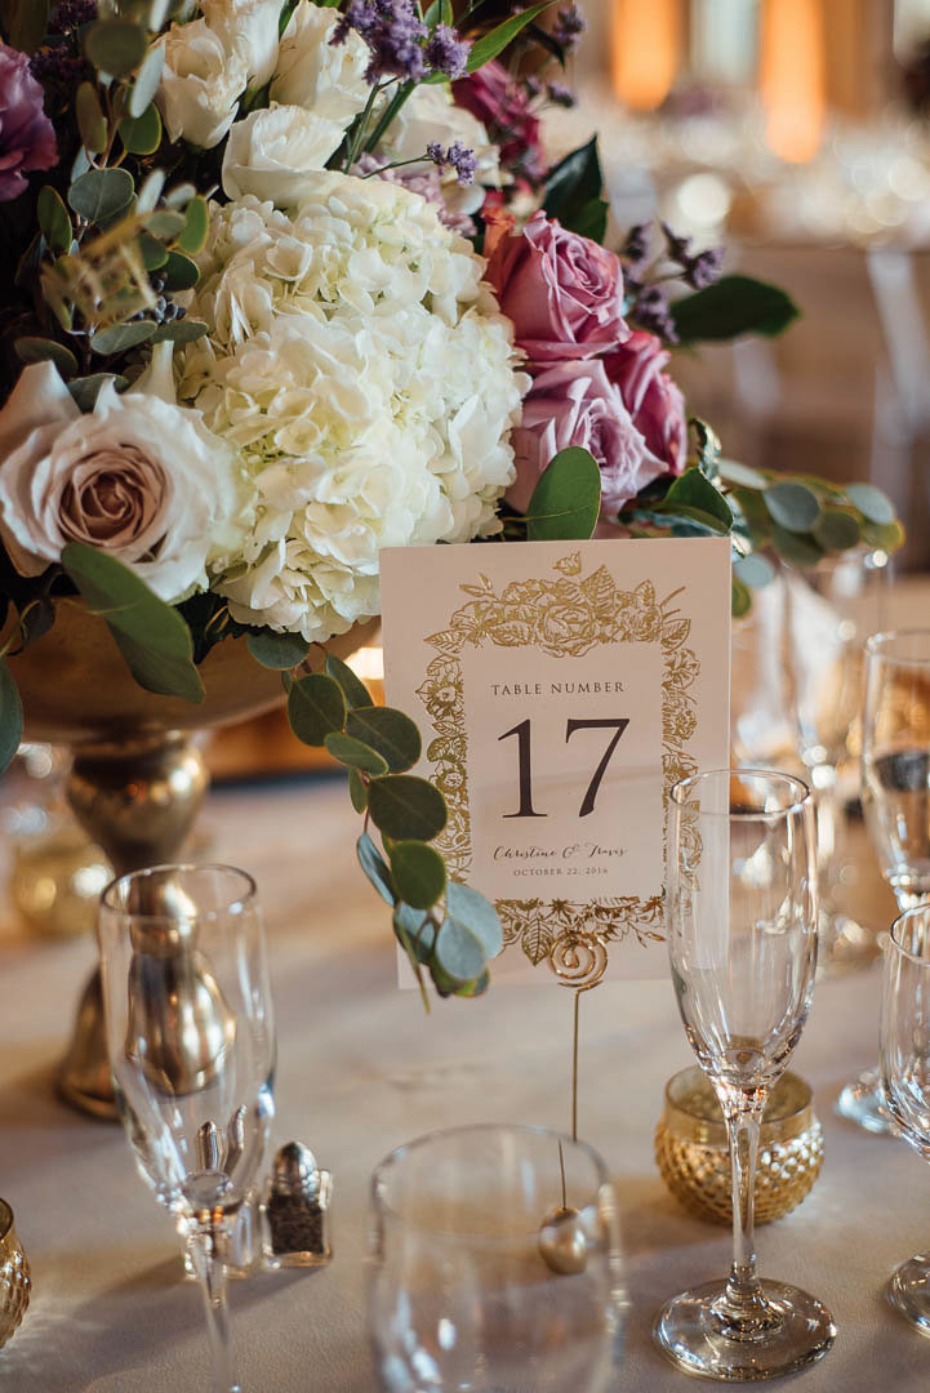 Chic table numbers